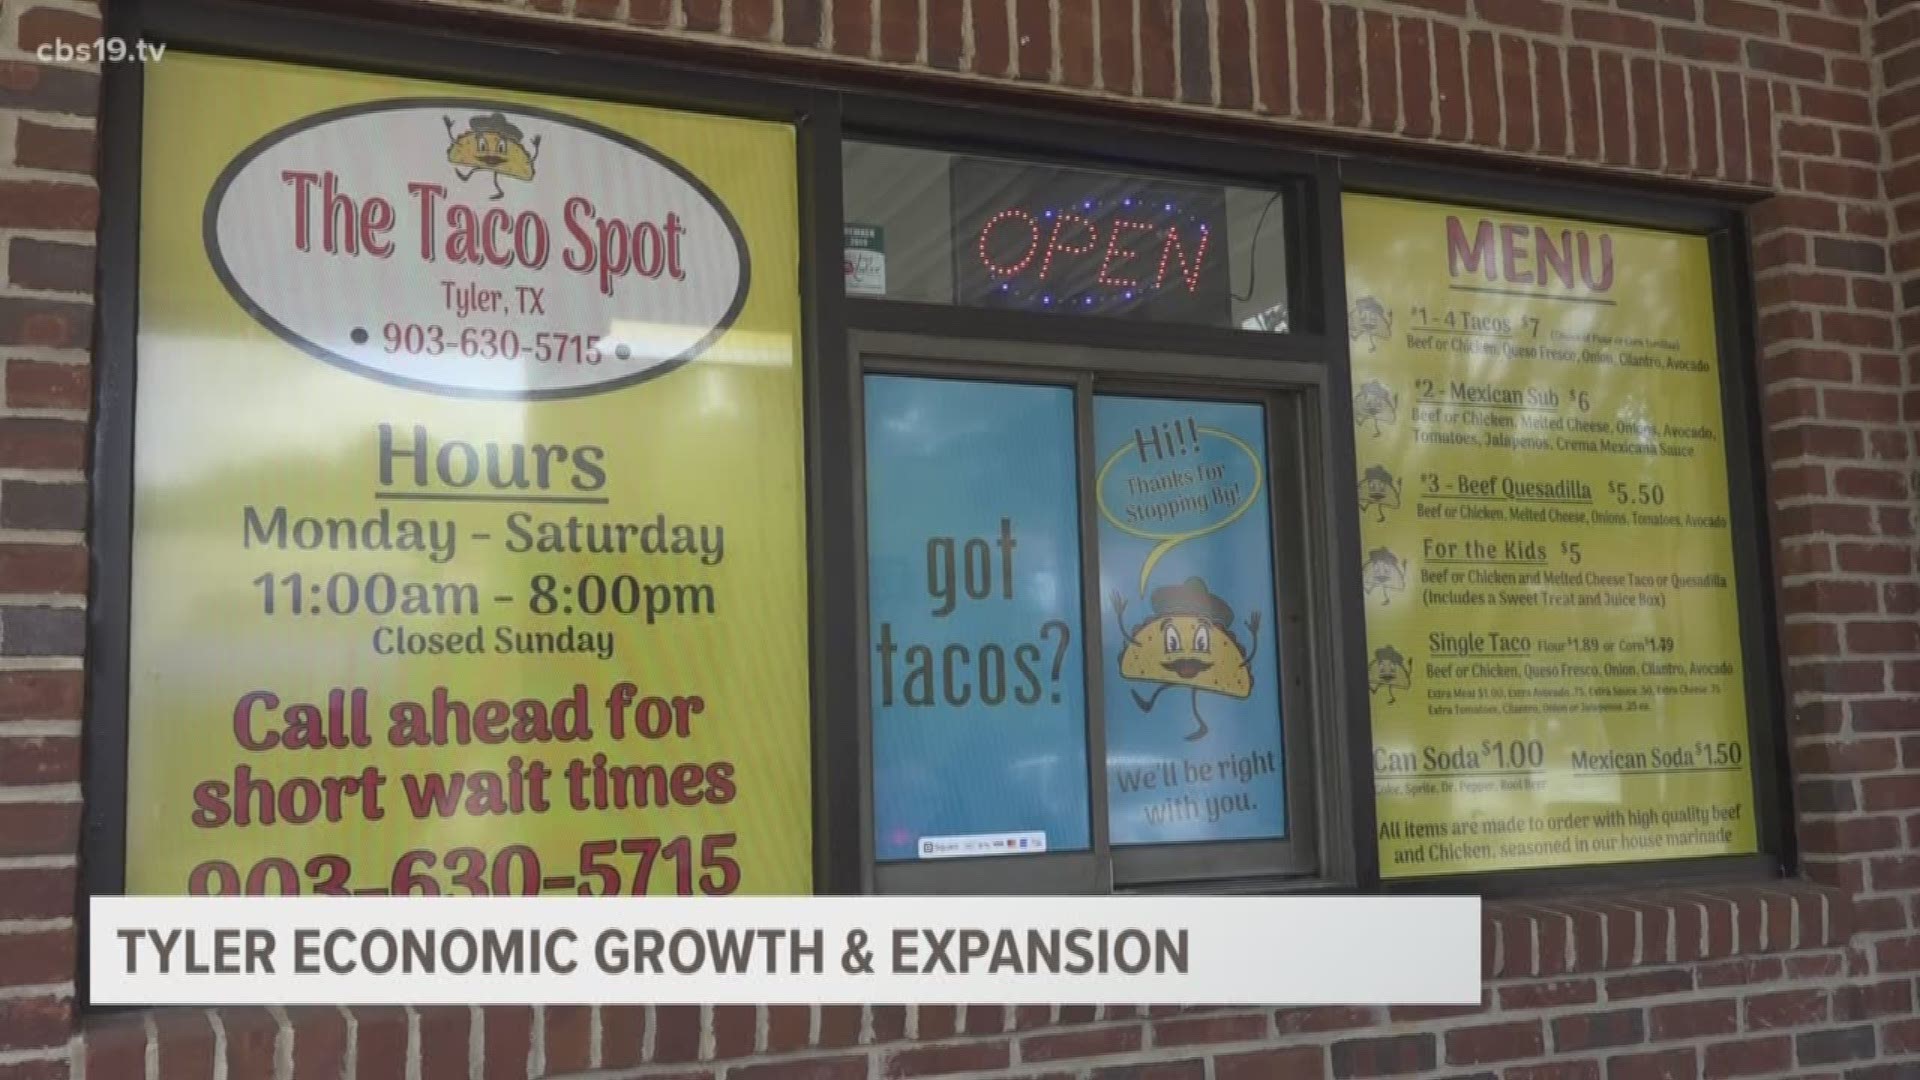 The emergence of new family businesses like "The Taco Spot" is just one sign of a Tyler economy that shows no signs of slowing down.